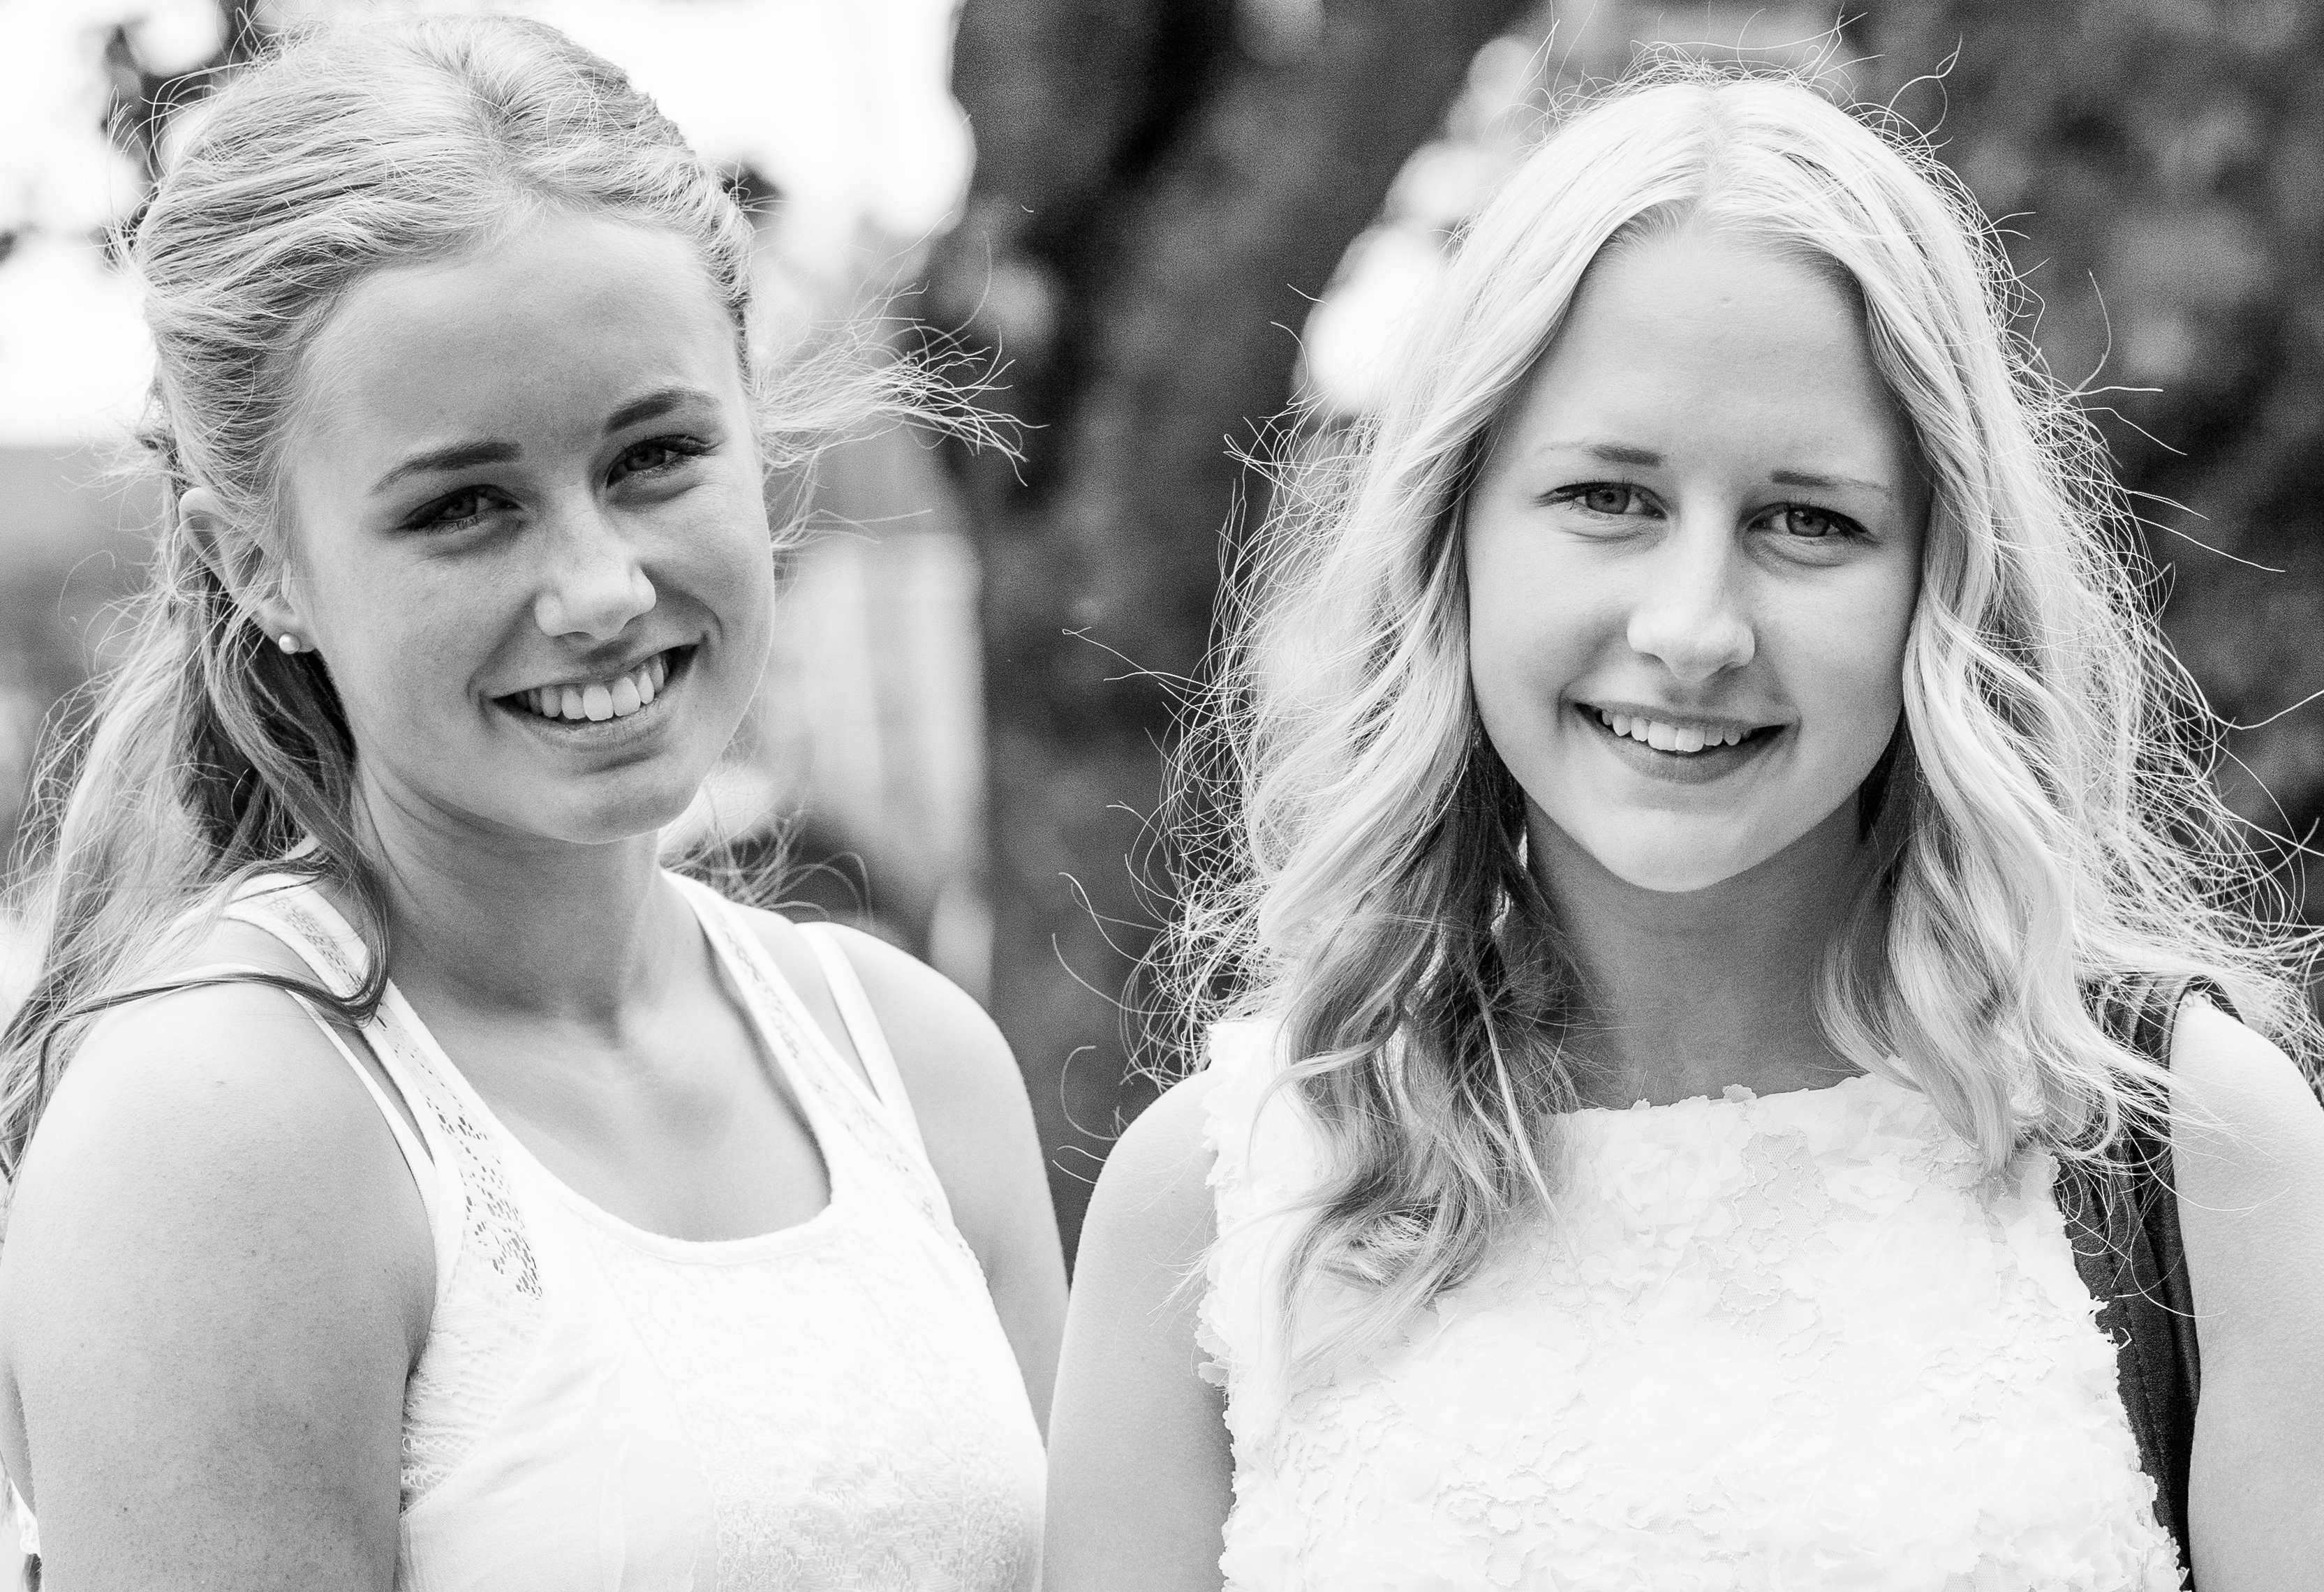 beautiful blond girls in Sigtuna, Sweden in June 2014, picture 4, black and white